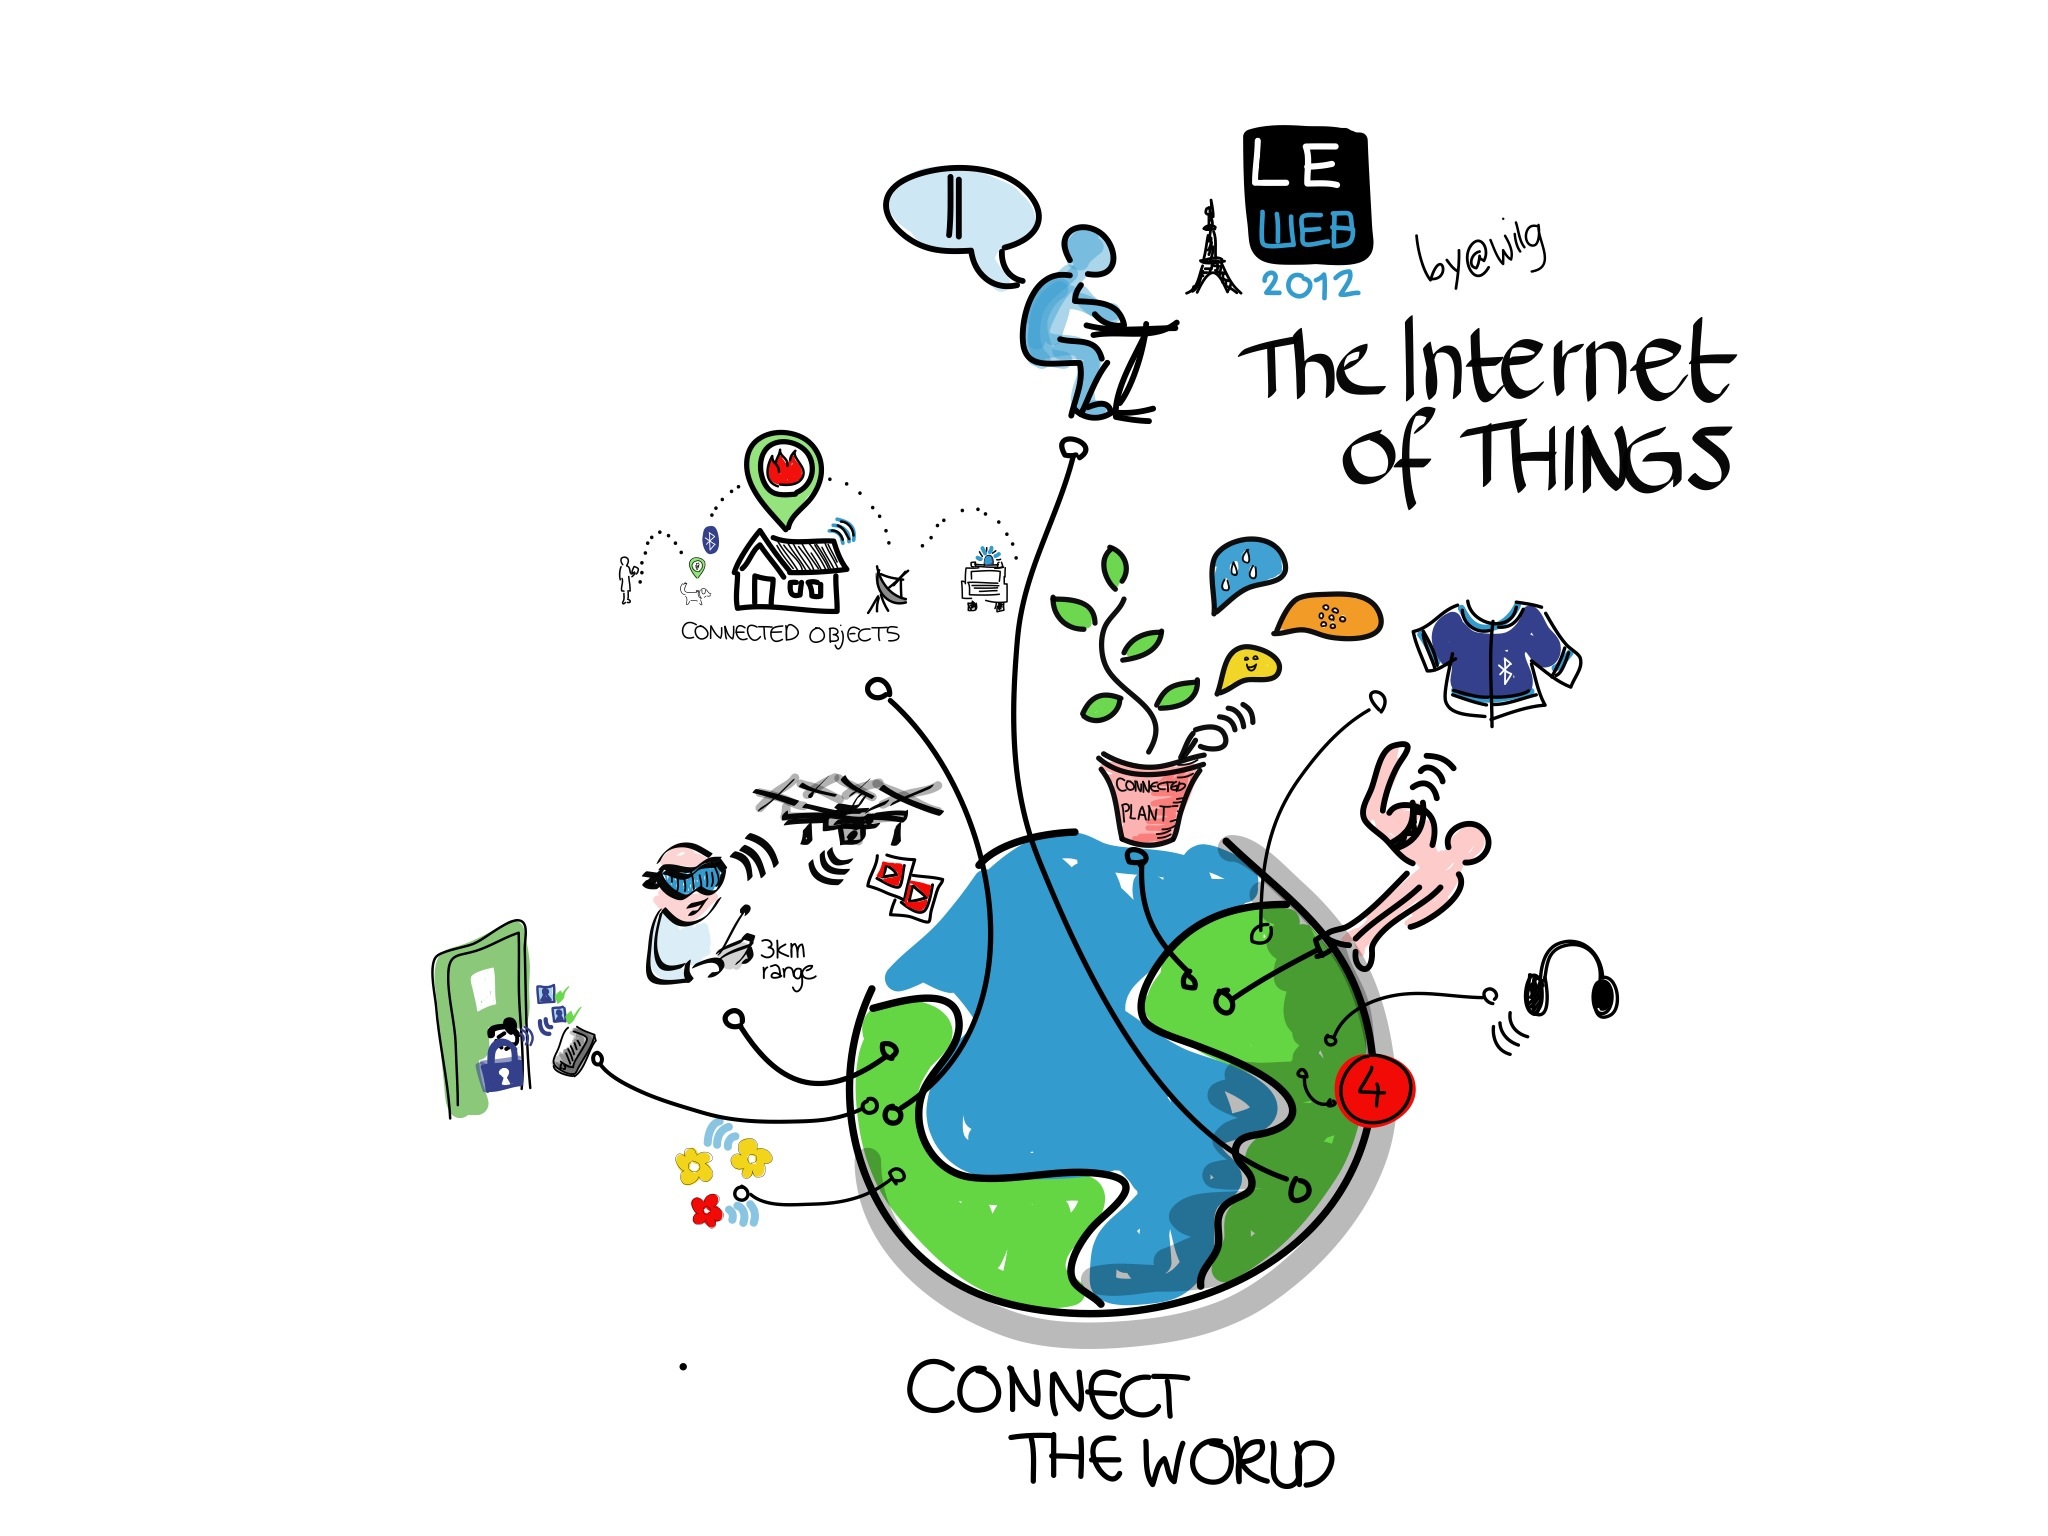 A drawing depicting the Internet of Things